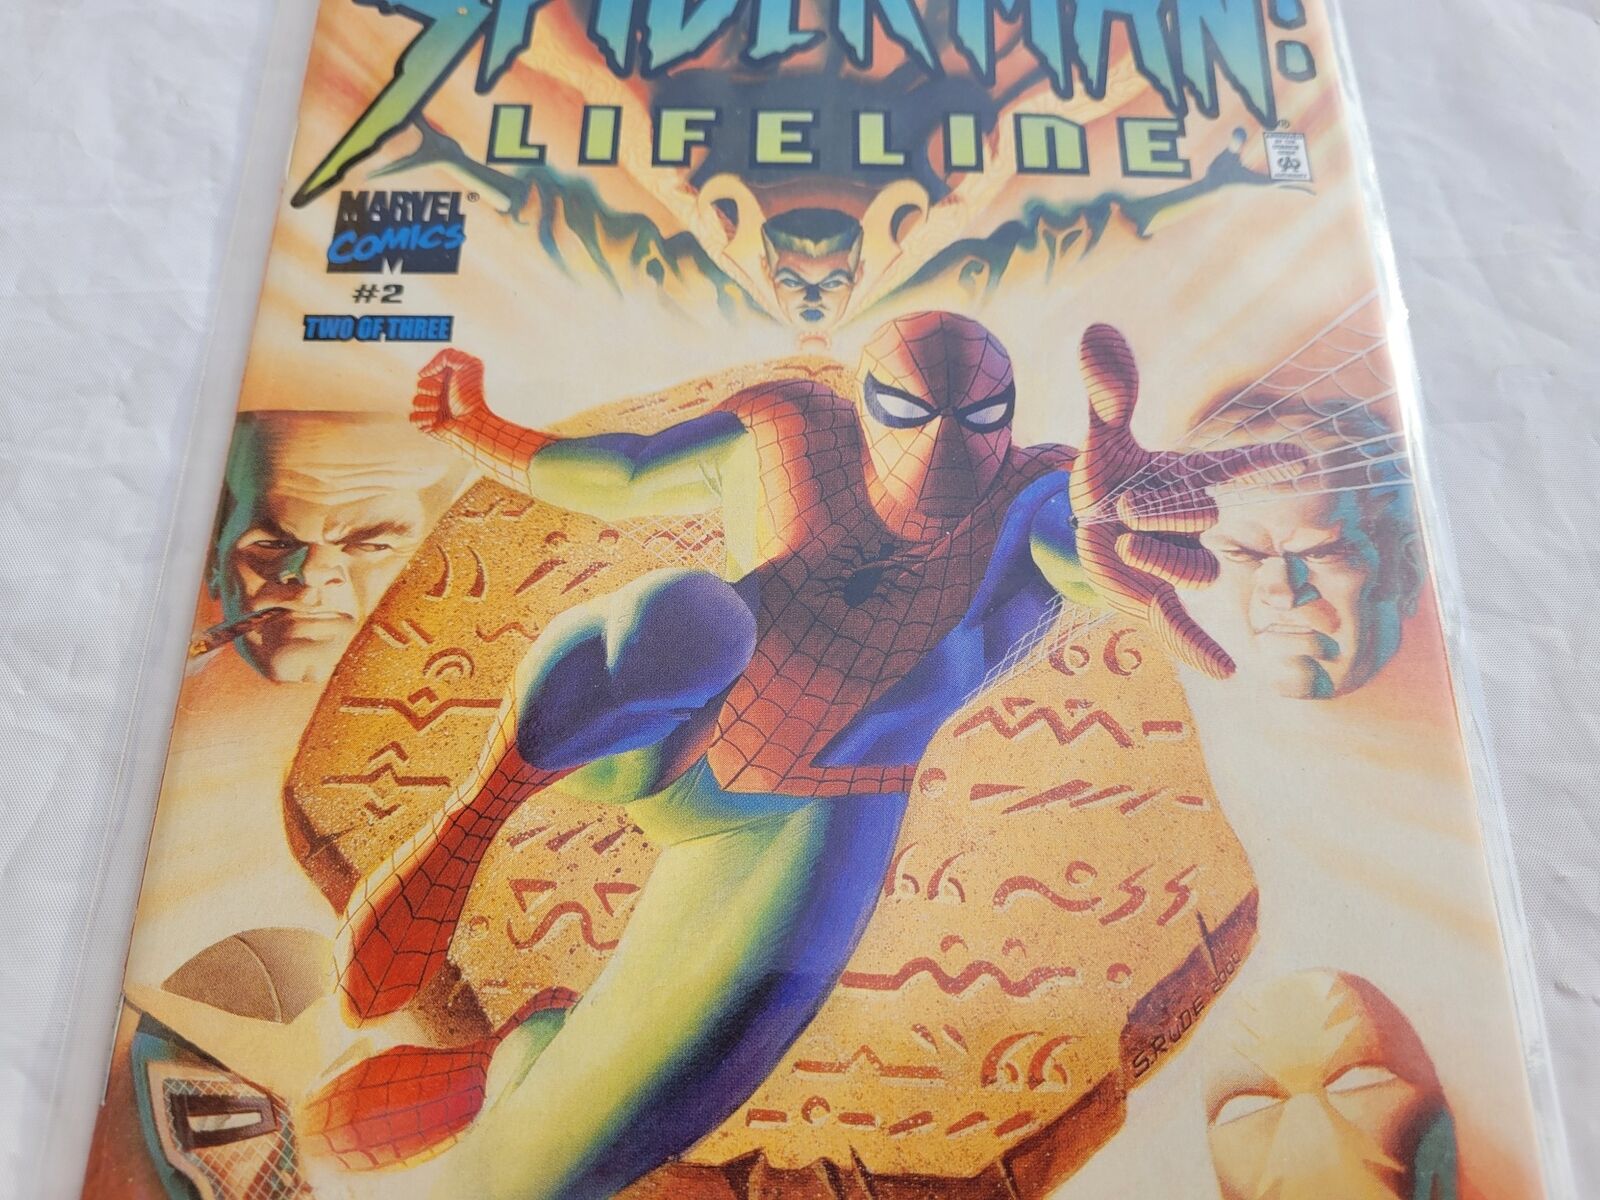 Comic Book Spider Man Lifeline Number 2 Two of Three Marvel